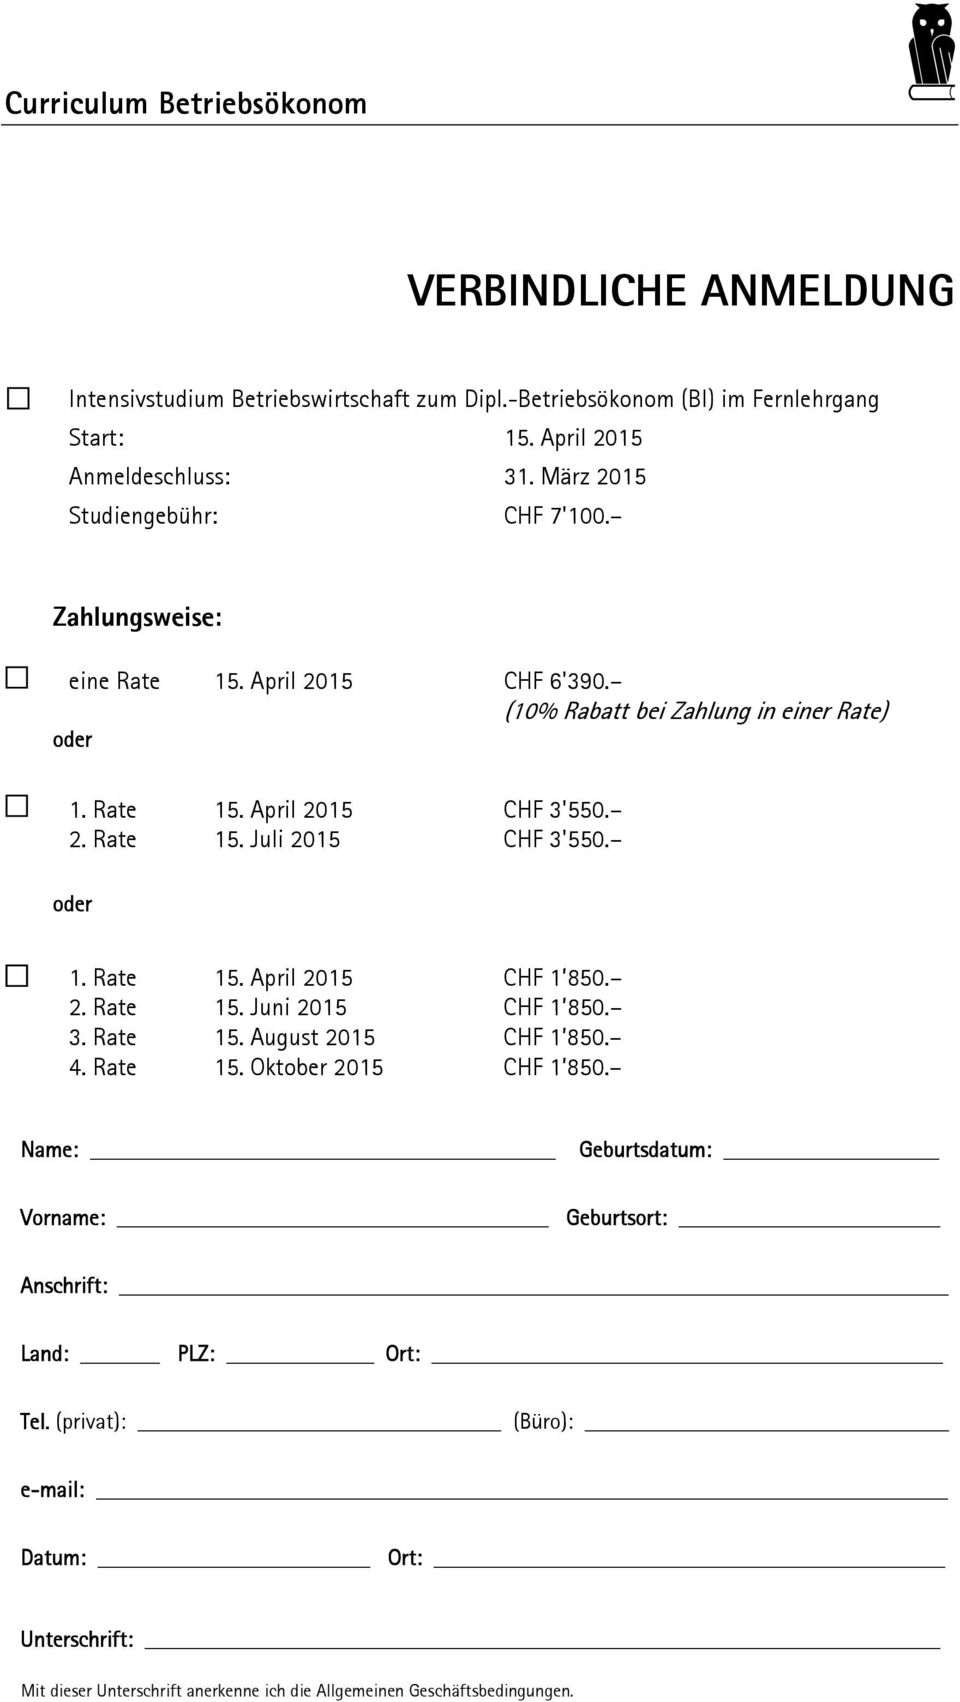 oder 1. Rate 15. April 2015 CHF 1 850. 2. Rate 15. Juni 2015 CHF 1 850. 3. Rate 15. August 2015 CHF 1 850. 4. Rate 15. Oktober 2015 CHF 1 850.